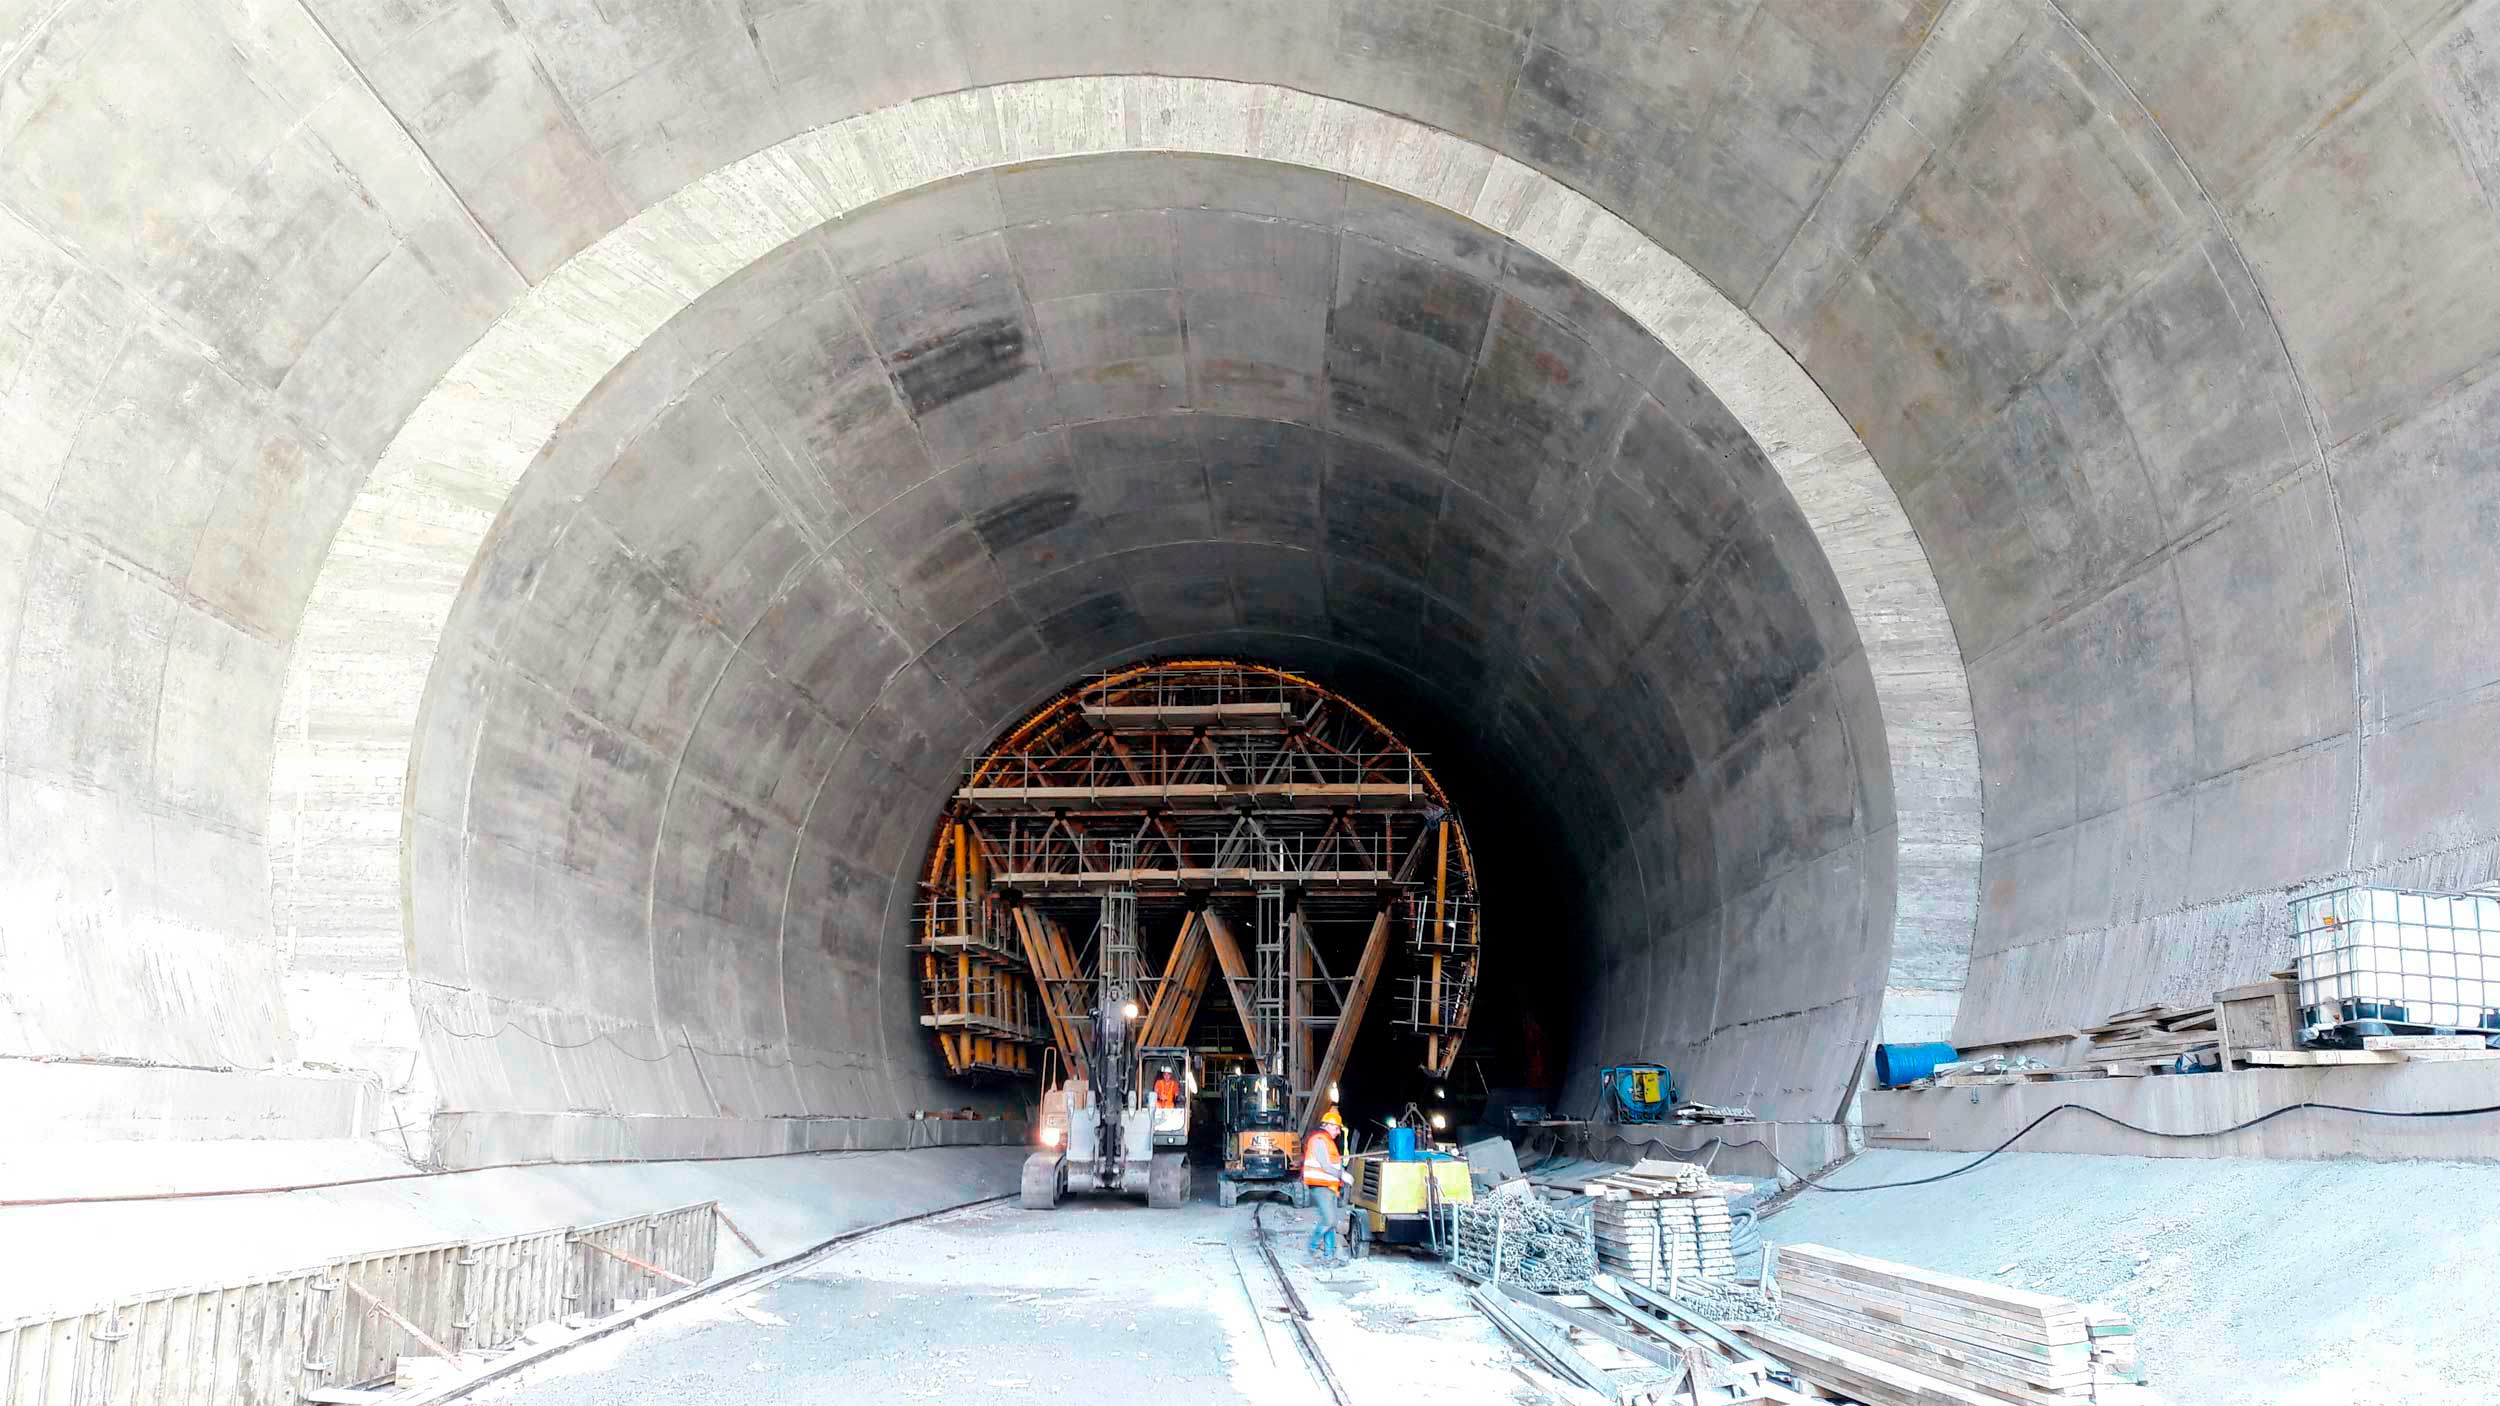 High performance concrete formwork solutions for tunnel construction projects. Discover why top contractors rely on ULMA for civil engineering projects